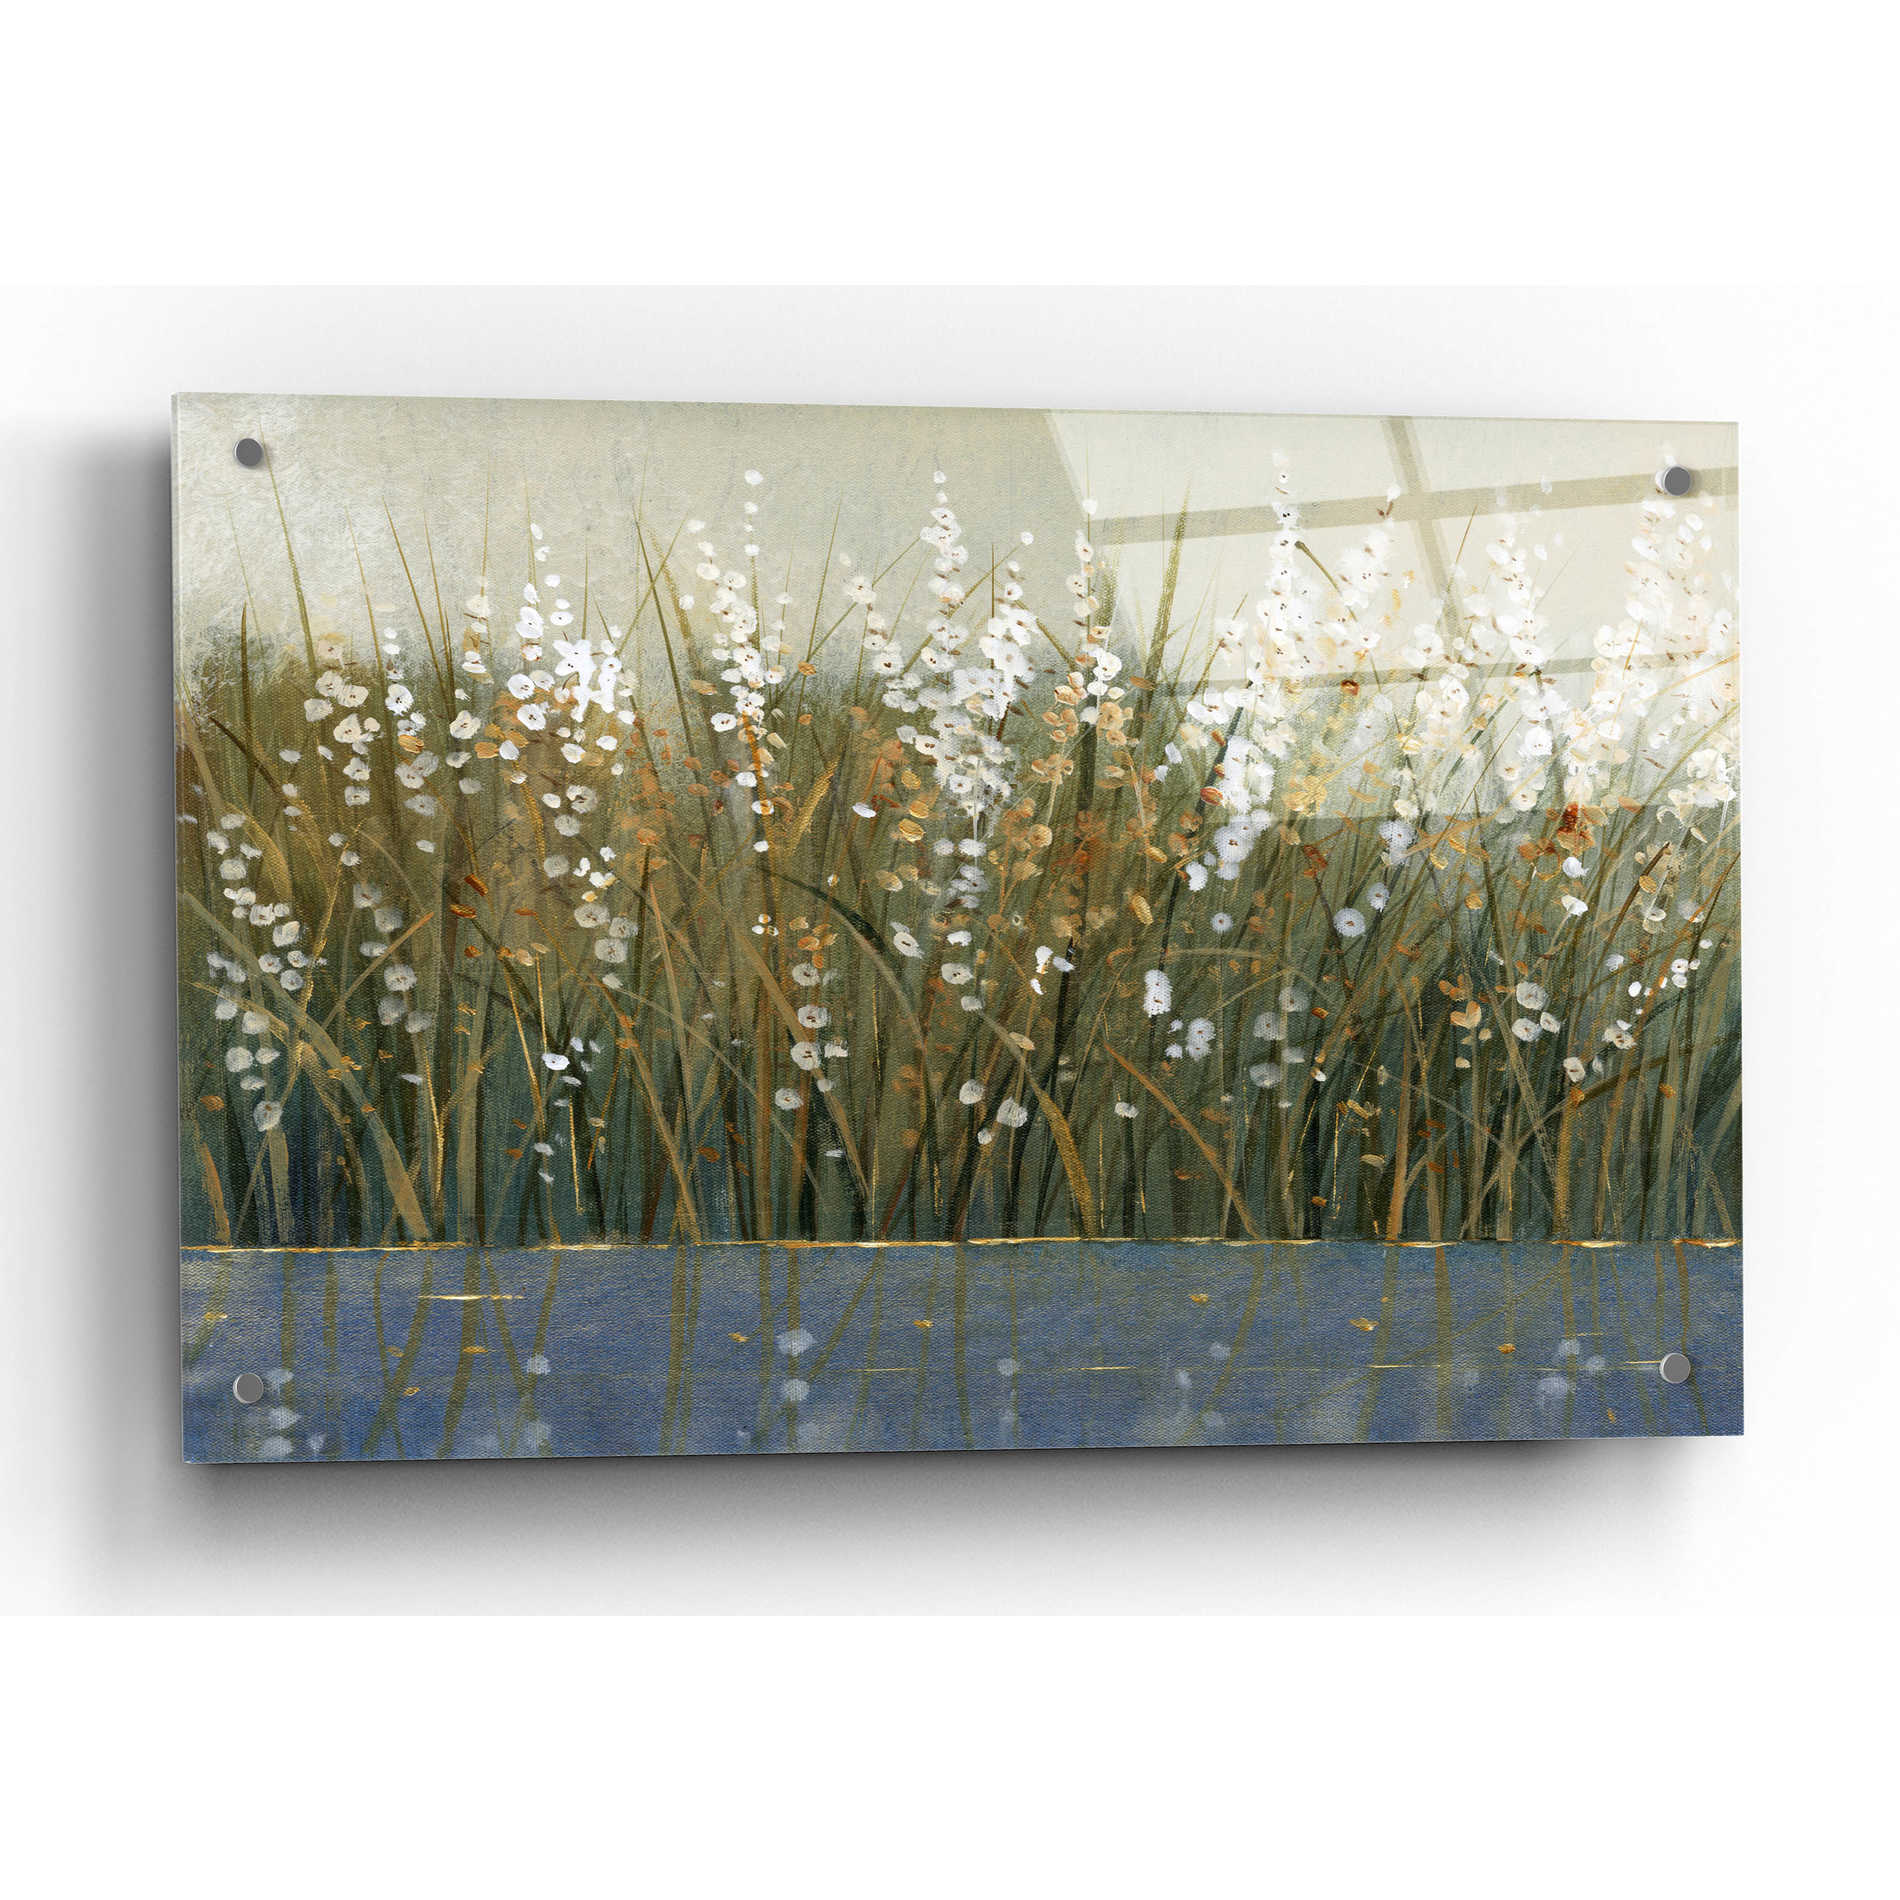 Epic Art 'By the Tall Grass II' by Tim O'Toole, Acrylic Glass Wall Art,36x24